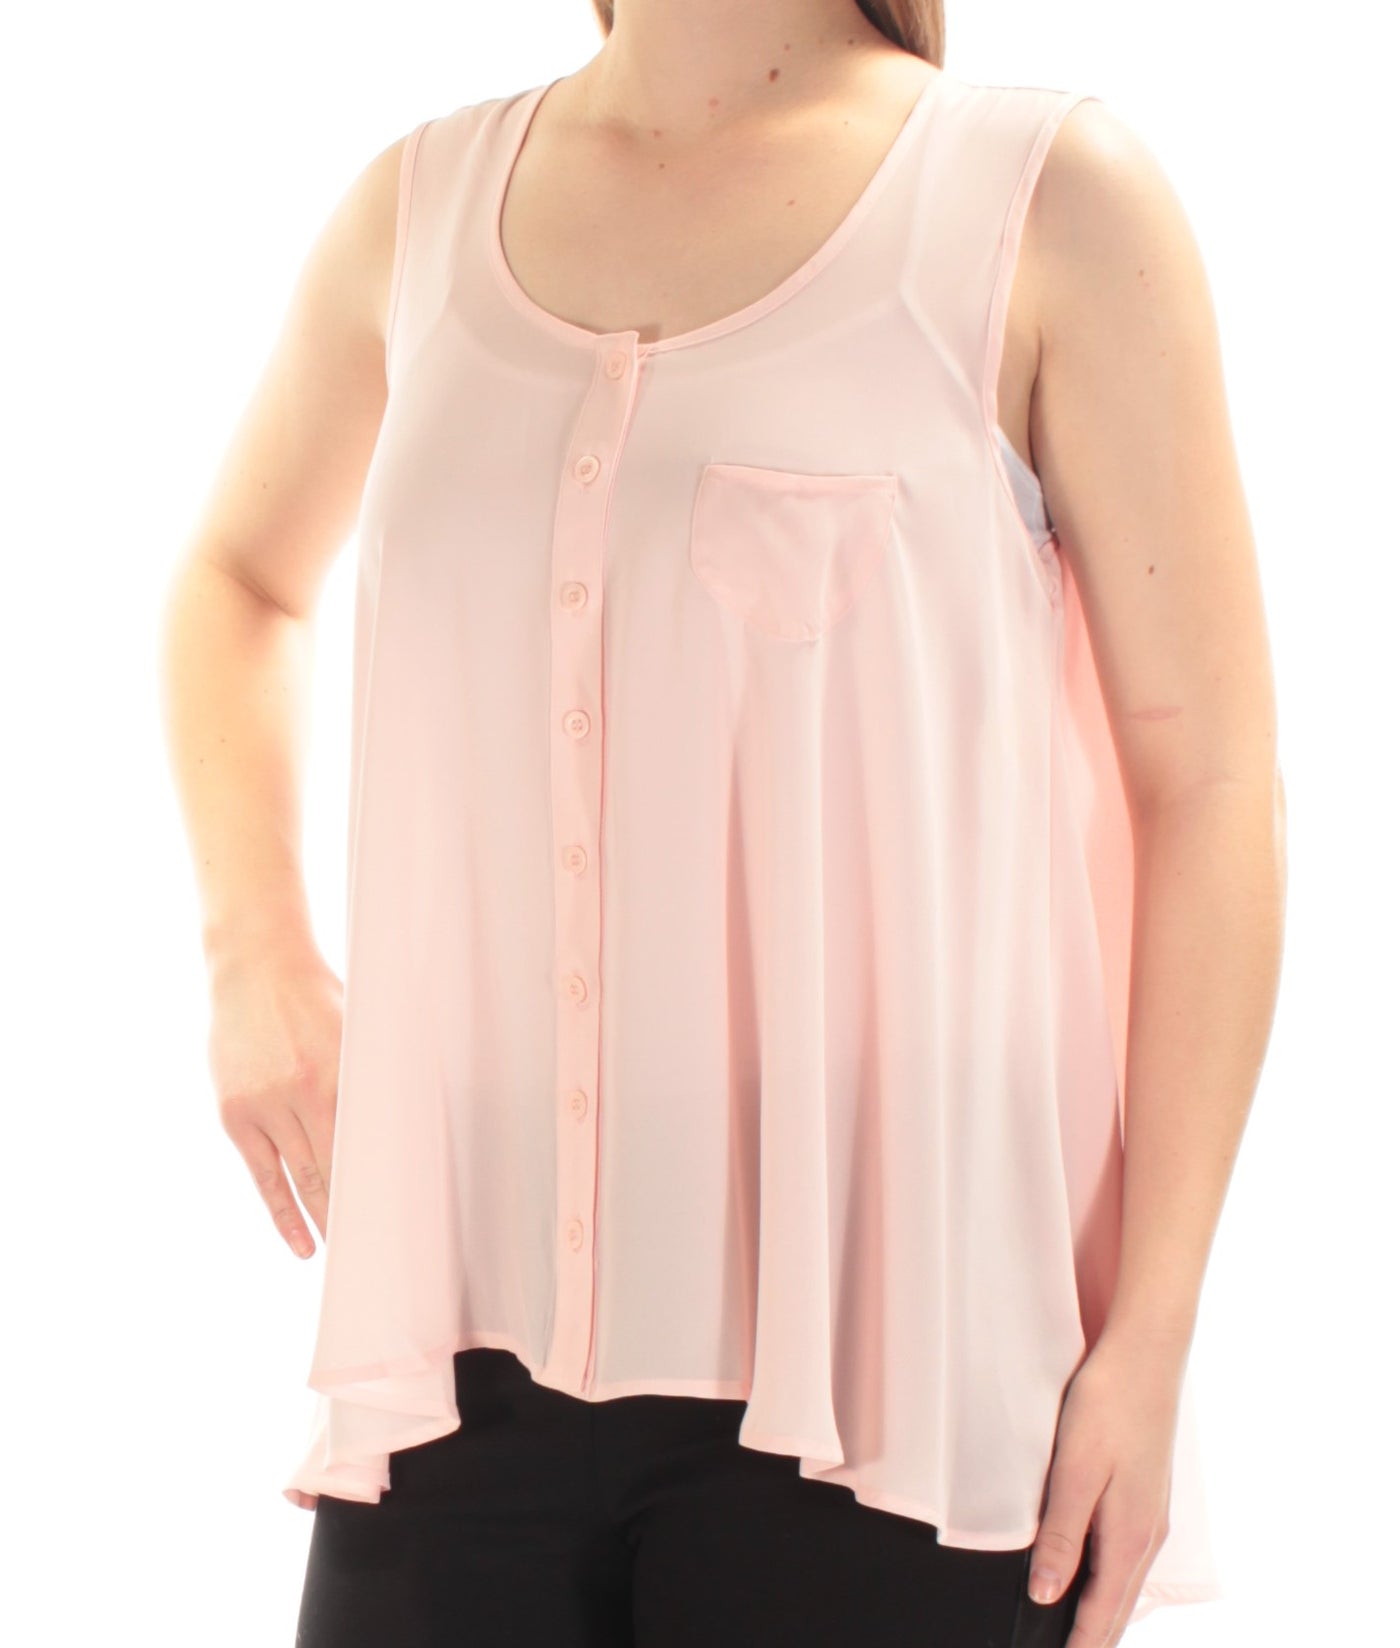 STYLE & COMPANY Womens Pink Pocketed Sleeveless Jewel Neck Hi-Lo Top